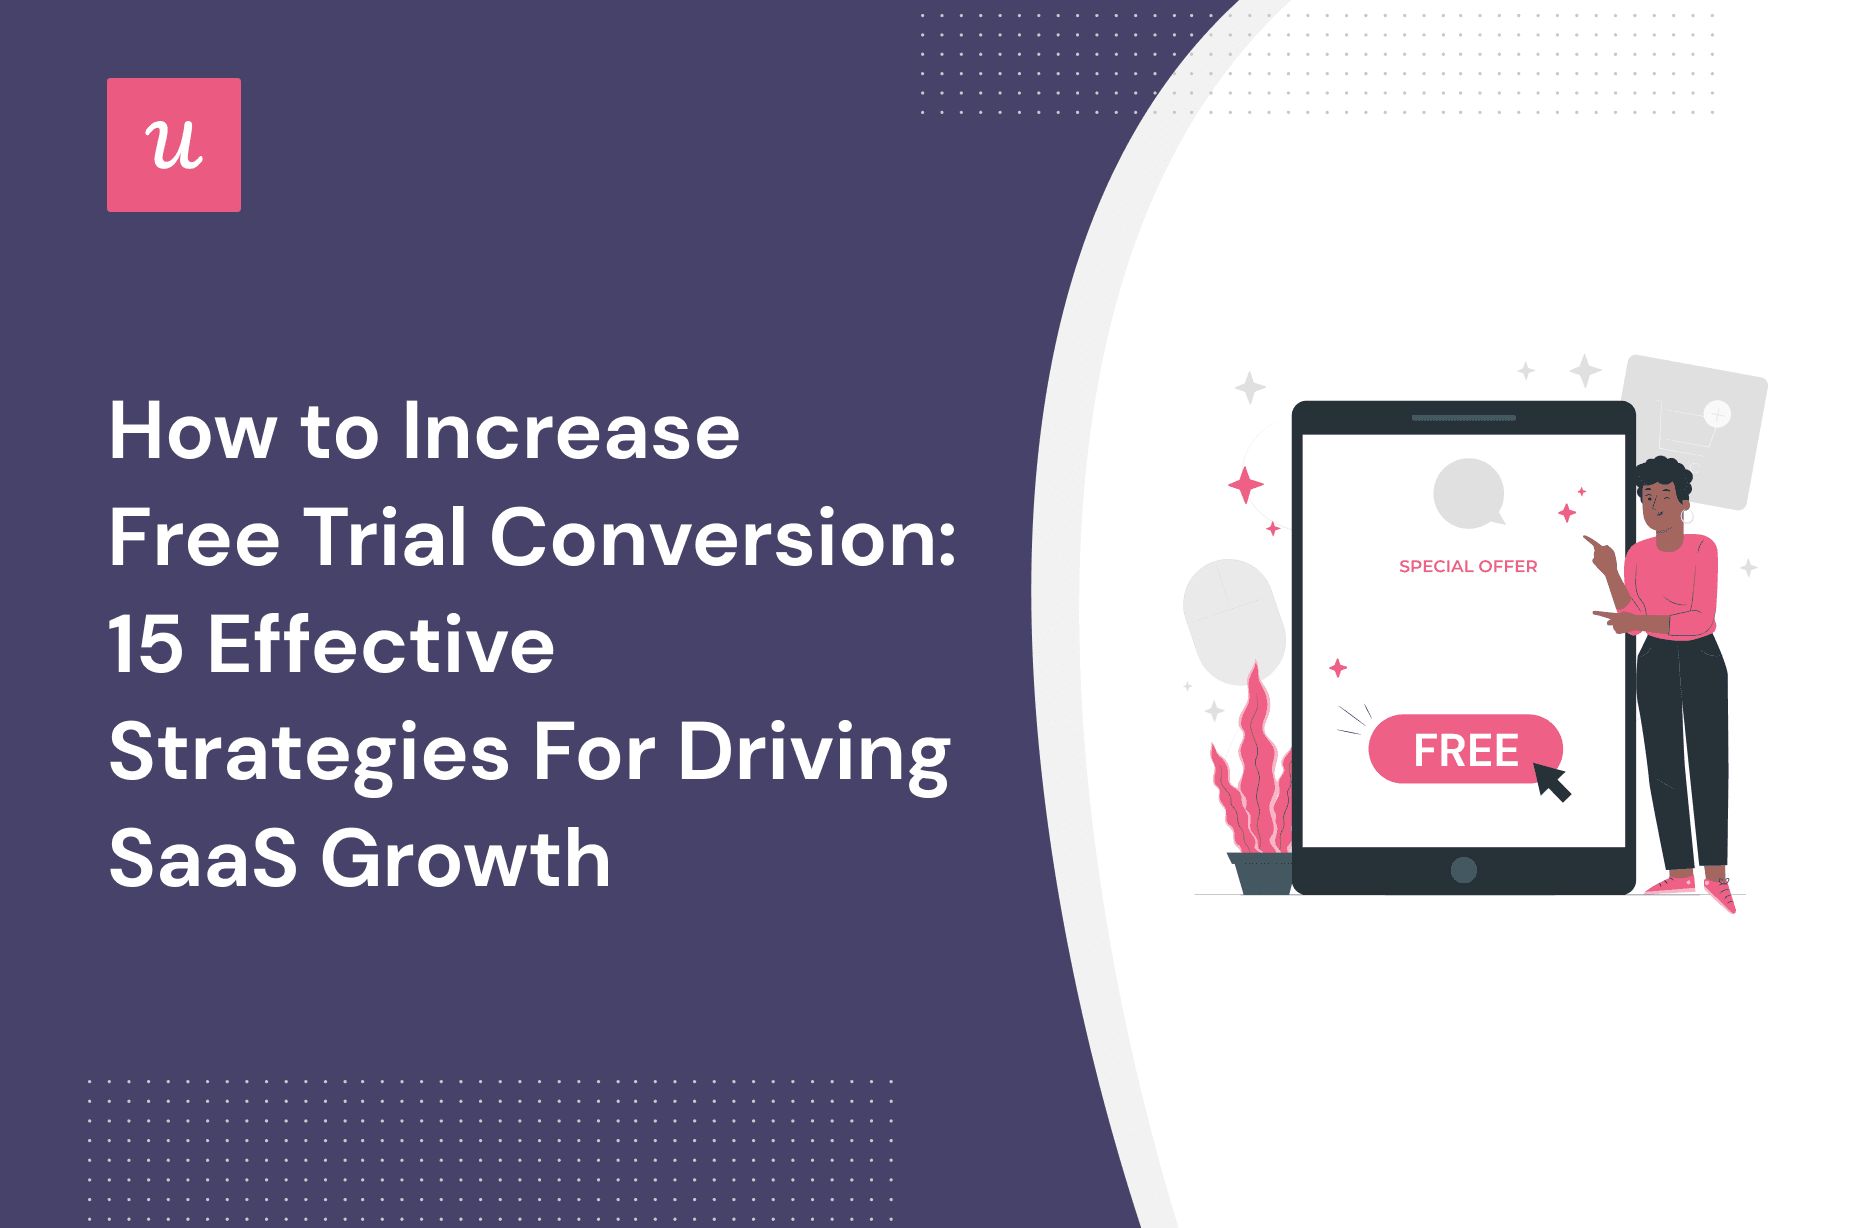 How to Increase Free Trial Conversion: 15 Effective Strategies For Driving SaaS Growth cover